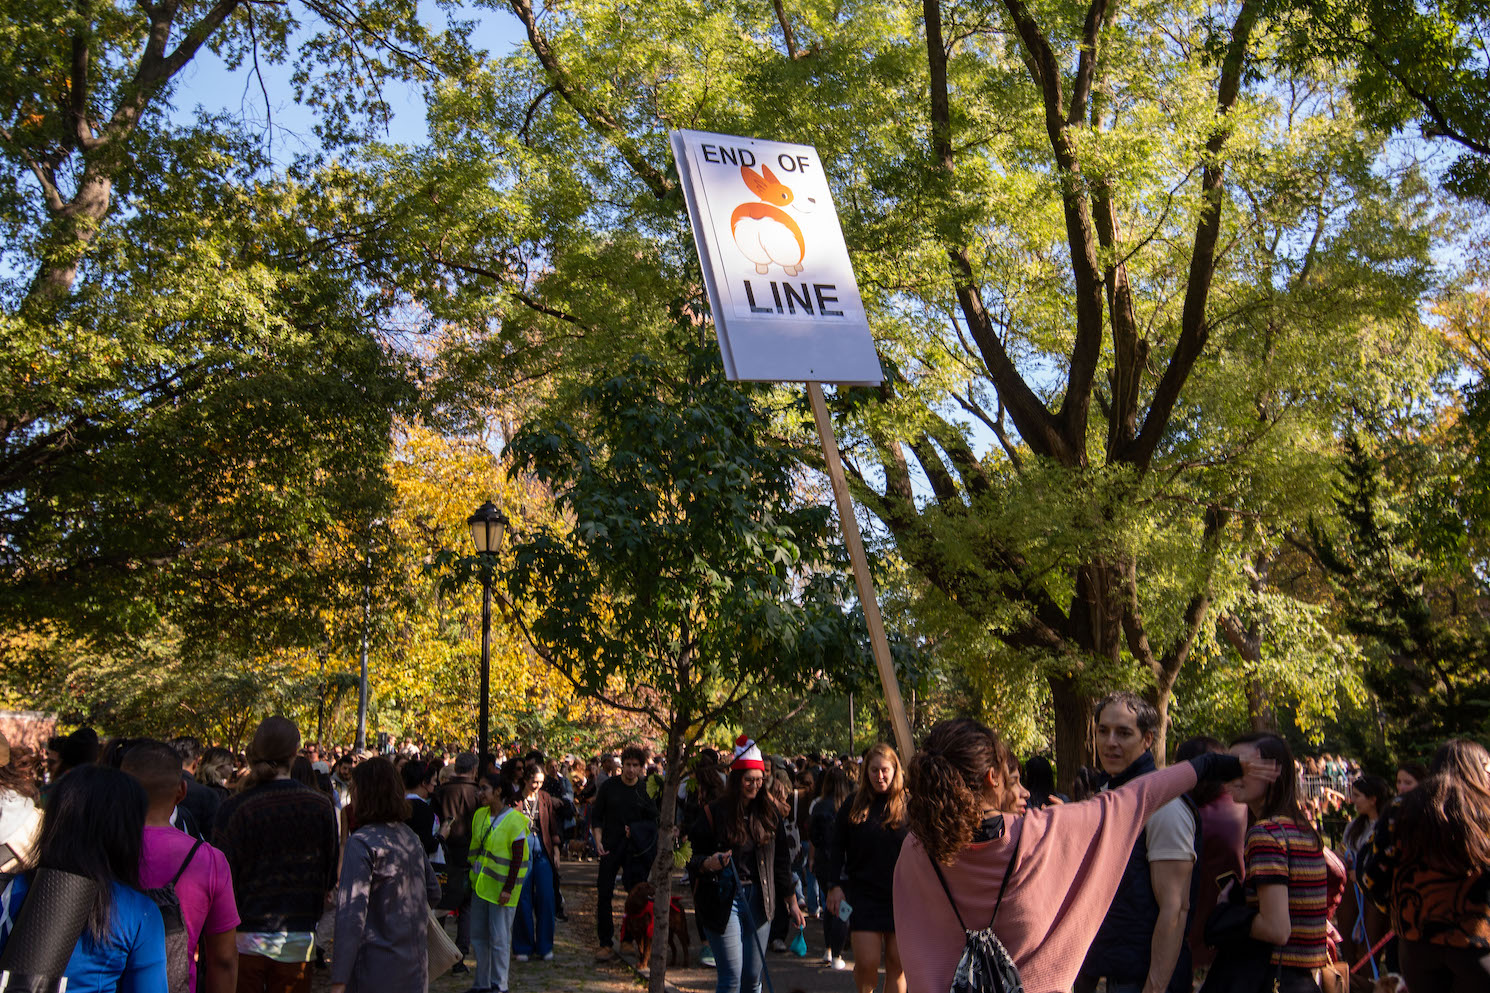 A large crowd of people walk through Tompkins Square Park as one person points to their right and holds a sign with an illustration of a corgi and text that says “END OF LINE.”